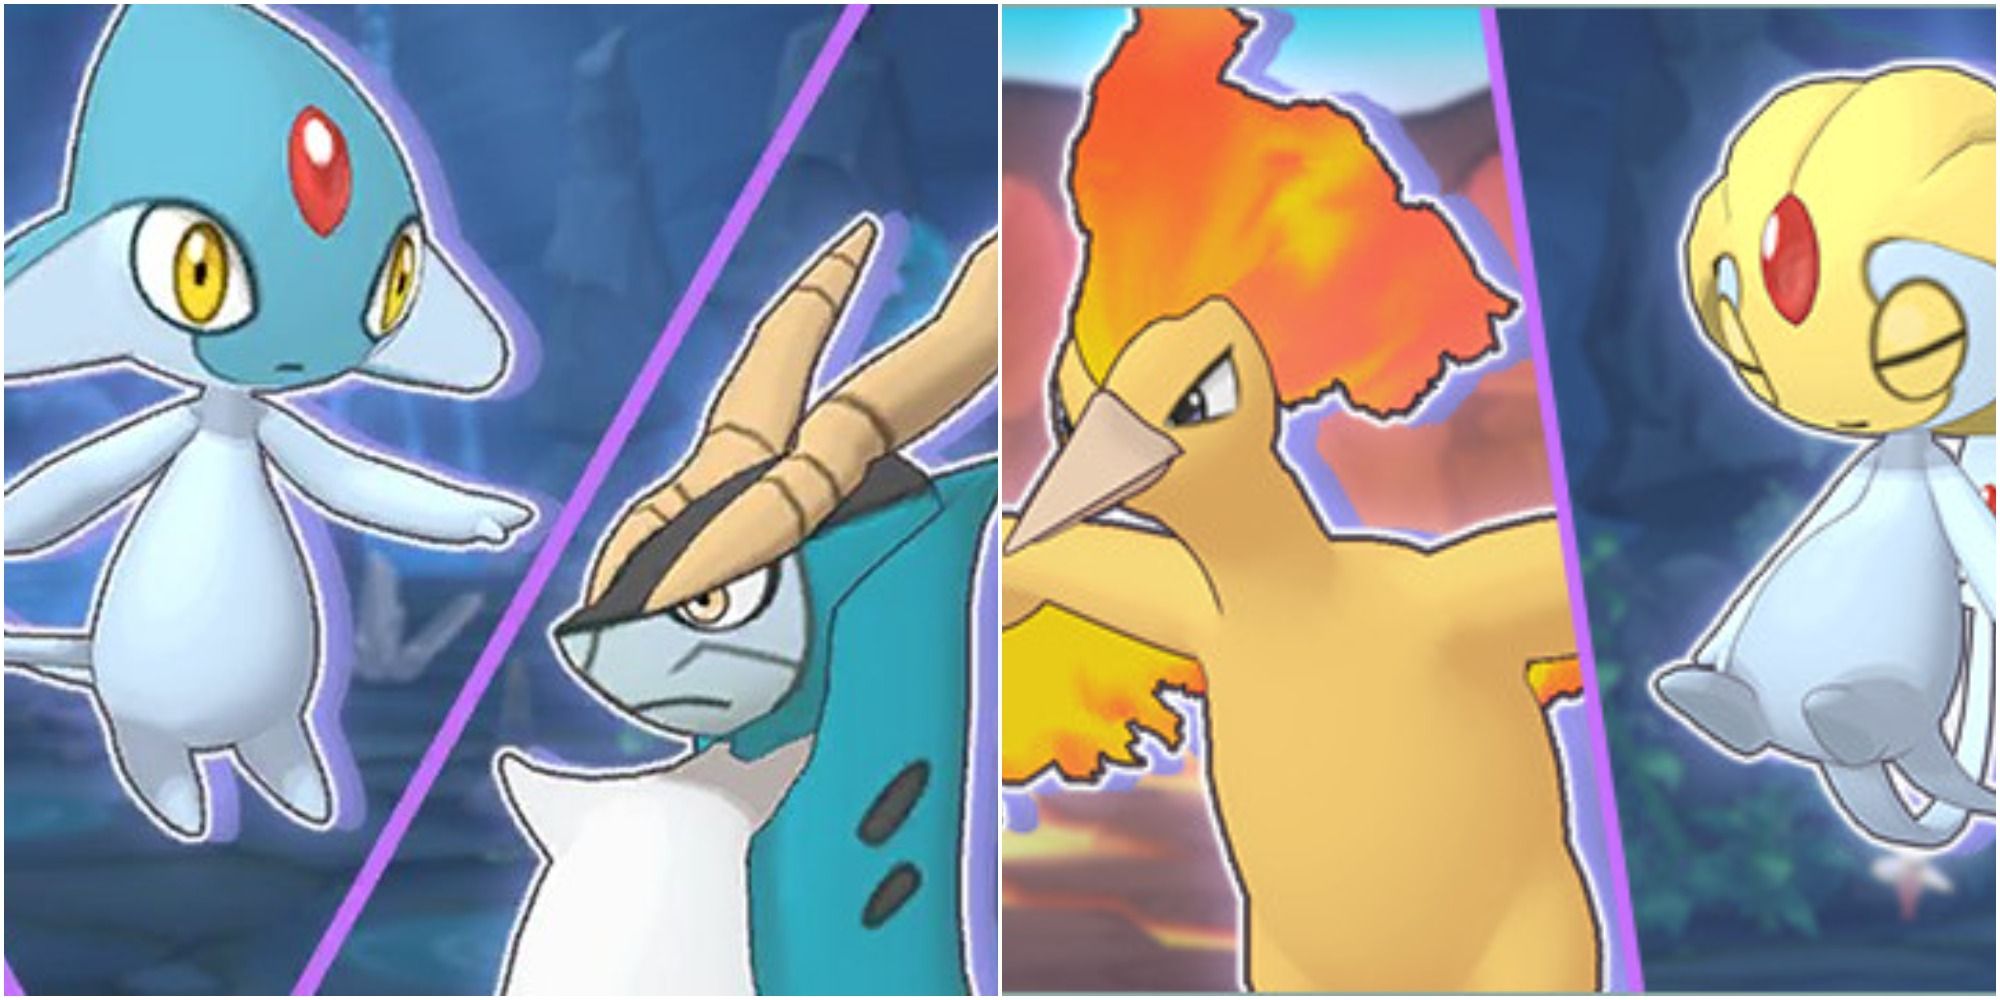 Legendary Gauntlet bosses: Azelf, Cobalion, Moltres, and Uxie prepare to fight.